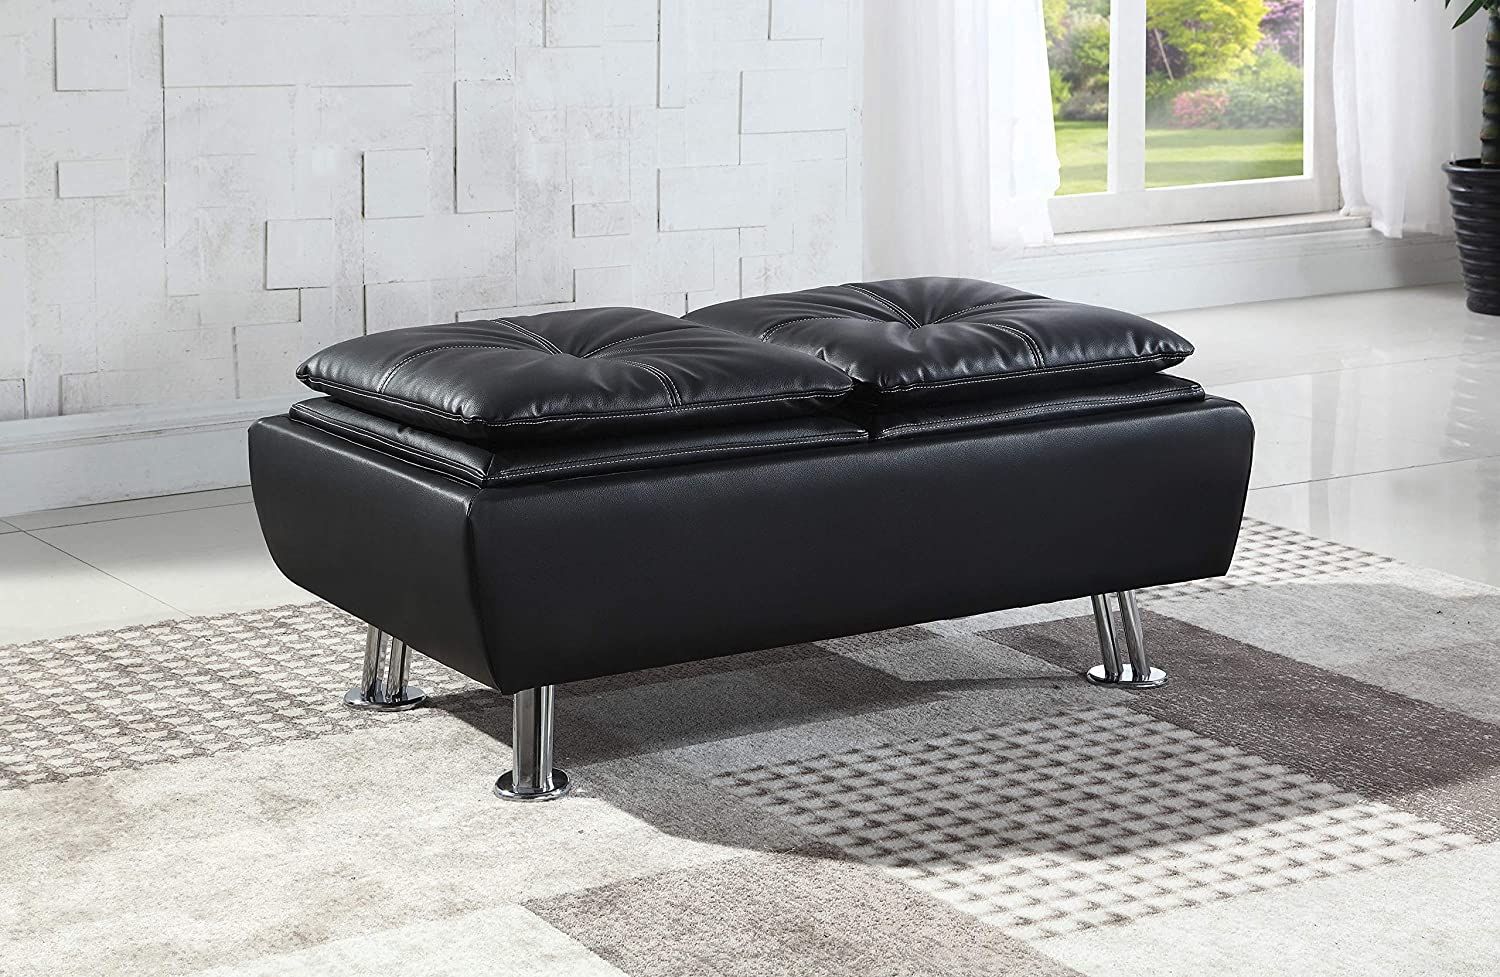 Rafael Faux Leather Storage Ottoman With Reversible Tray Tops Black,  7445043665640 | Ebay With Regard To Ottomans With Reversible Tray (View 7 of 15)